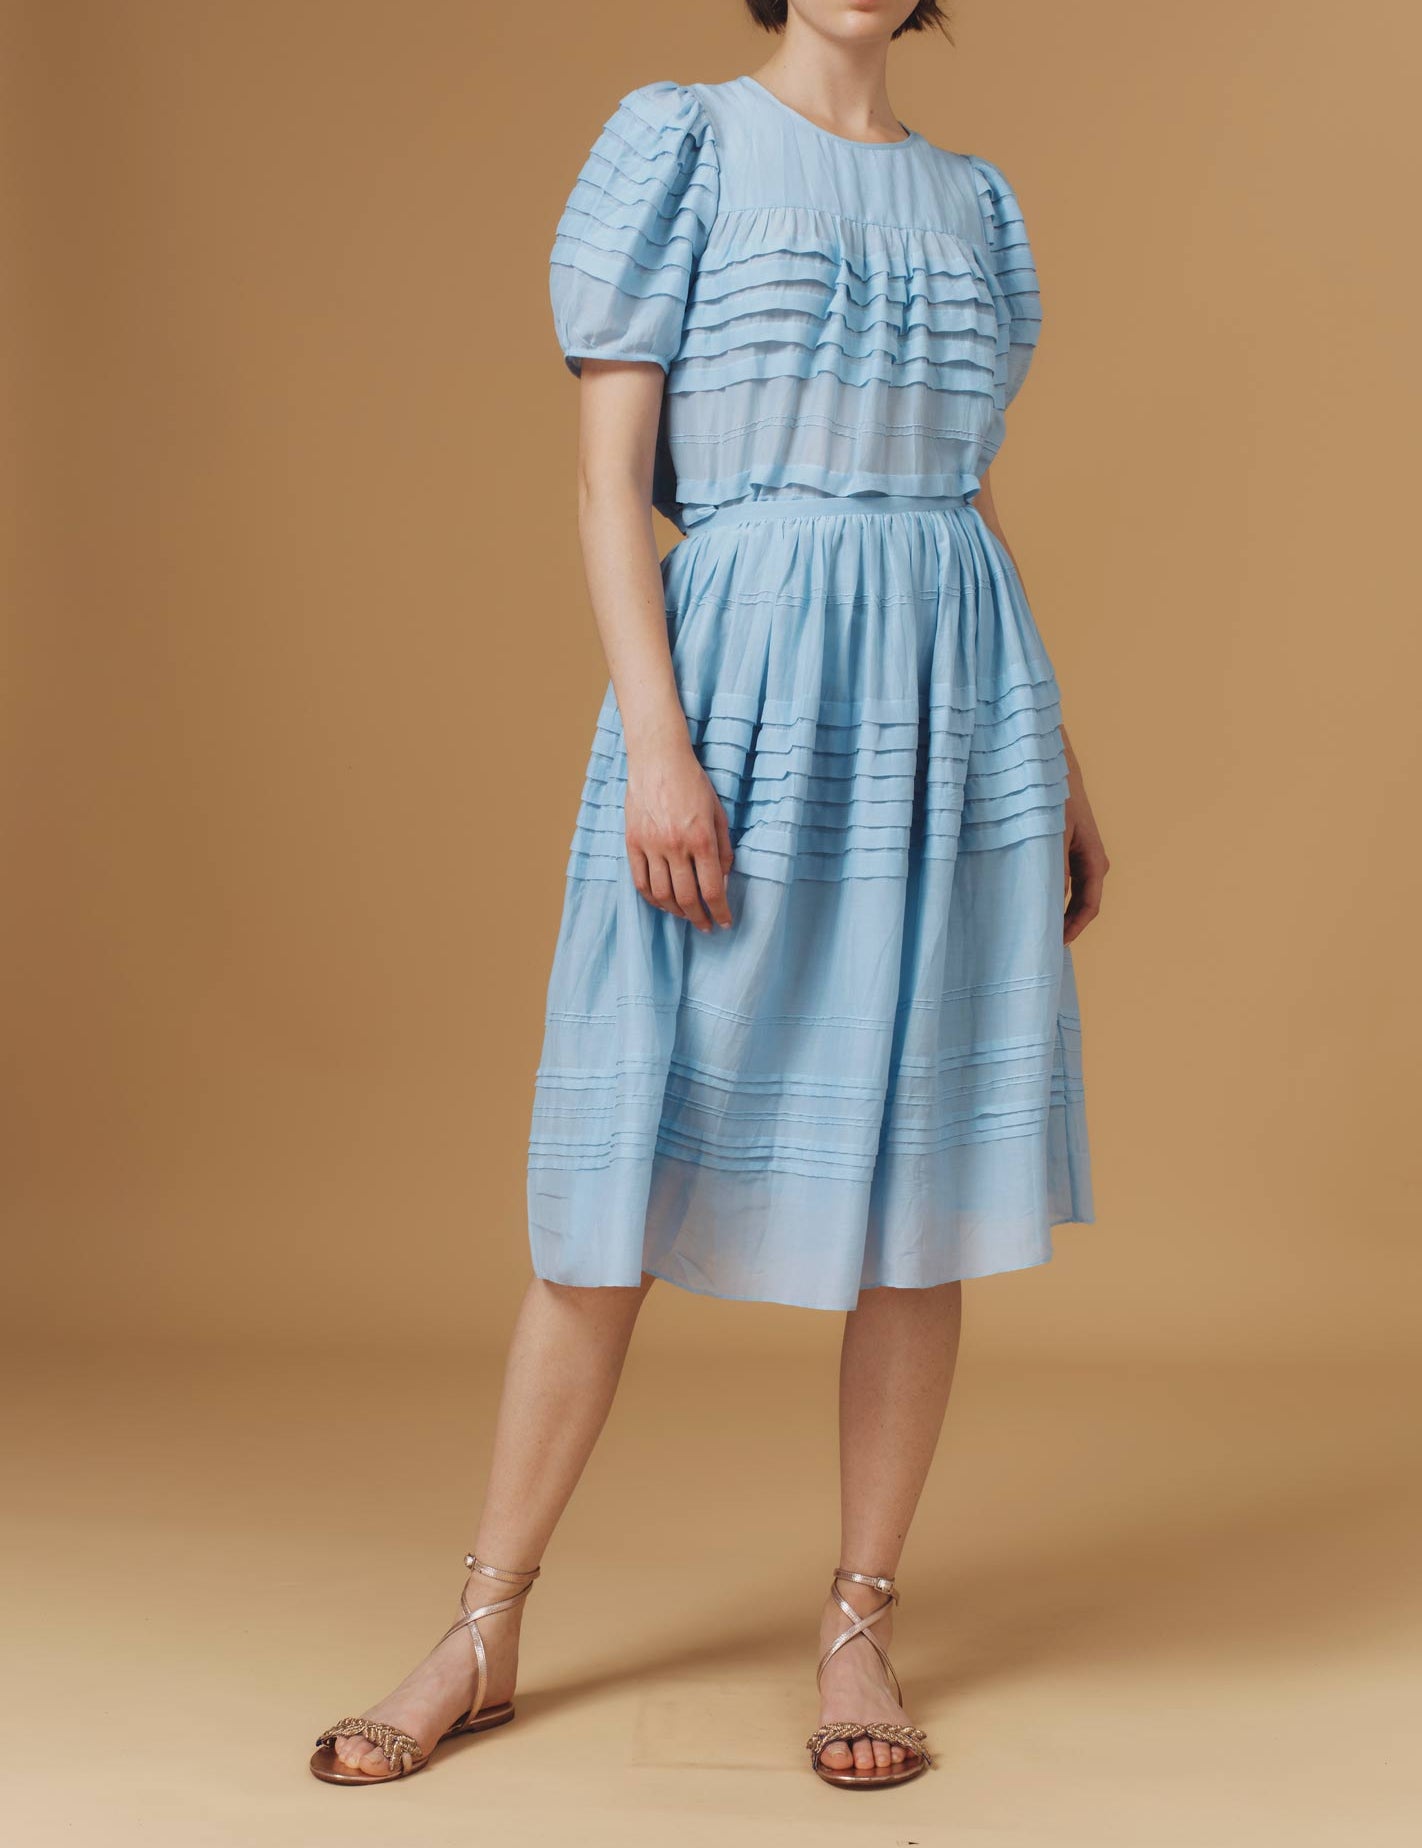 Large view of Zafar Optical Pleats Heaven Blue Skirt with Olympia top by Thierry Colson